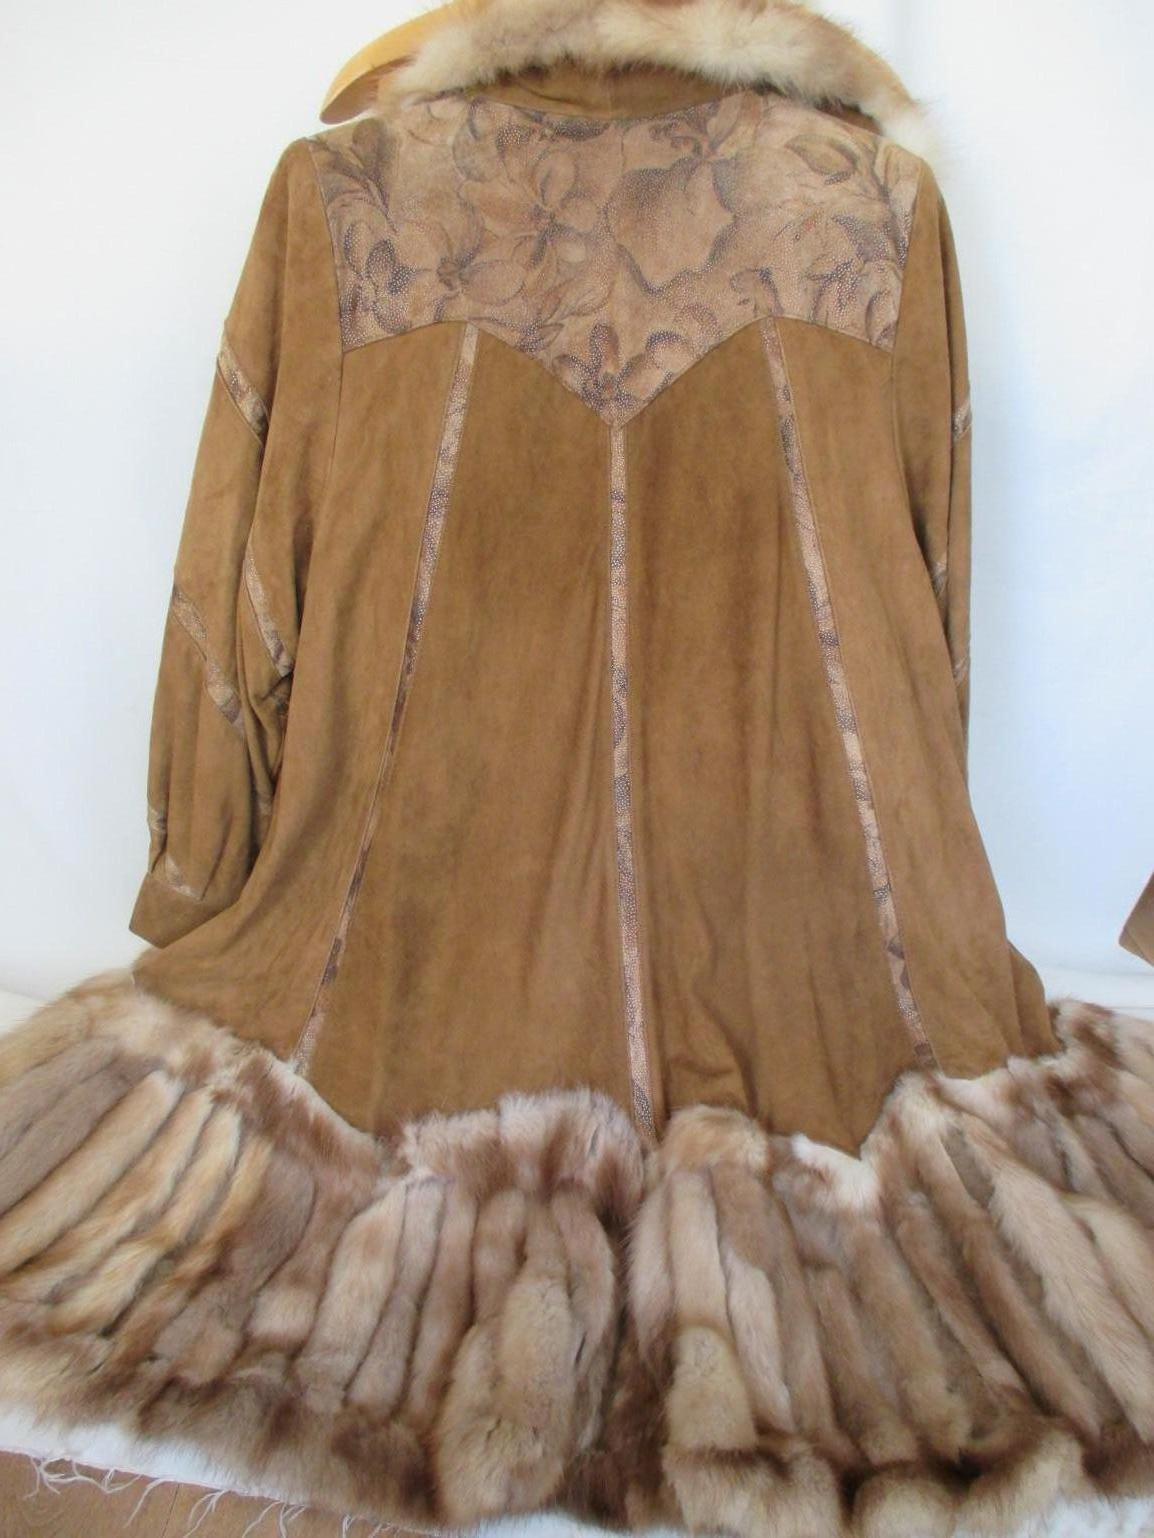 Exclusive hand-made designed Tsonas Creations sable fur swing coat from Crans-Montana, Switzerland. 

We offer more exclusive fur items, view our frontstore.

Details:
Made of quality sable fur with decorated soft and supple lambskin leather
Its